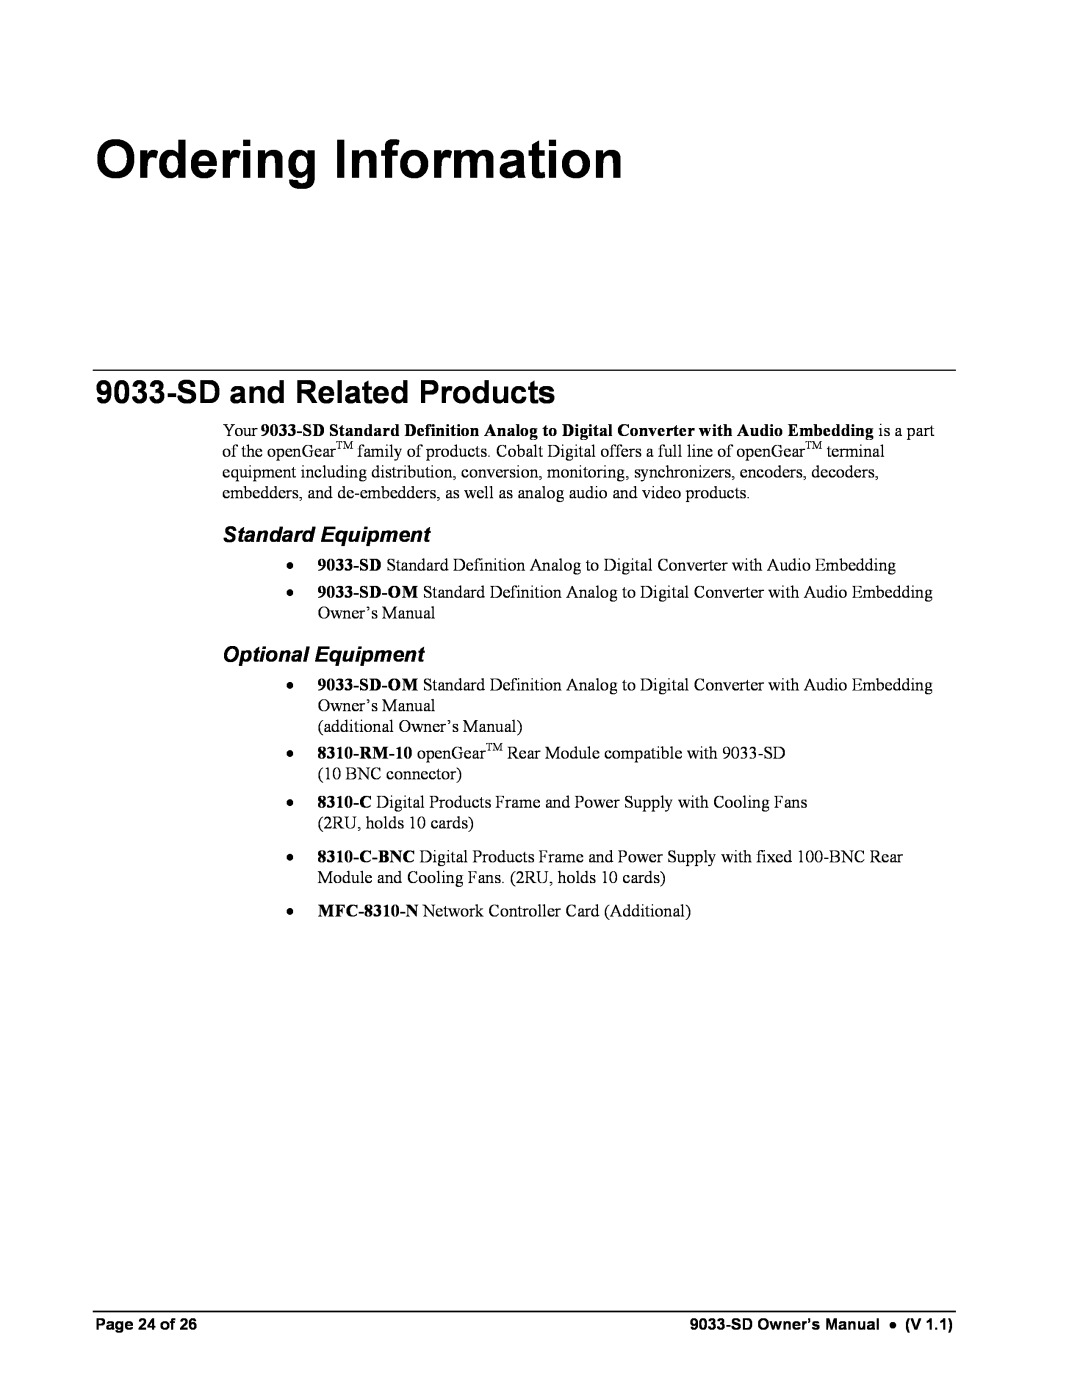 Cobalt Networks 9033-SD owner manual Ordering Information, SD and Related Products, Standard Equipment, Optional Equipment 